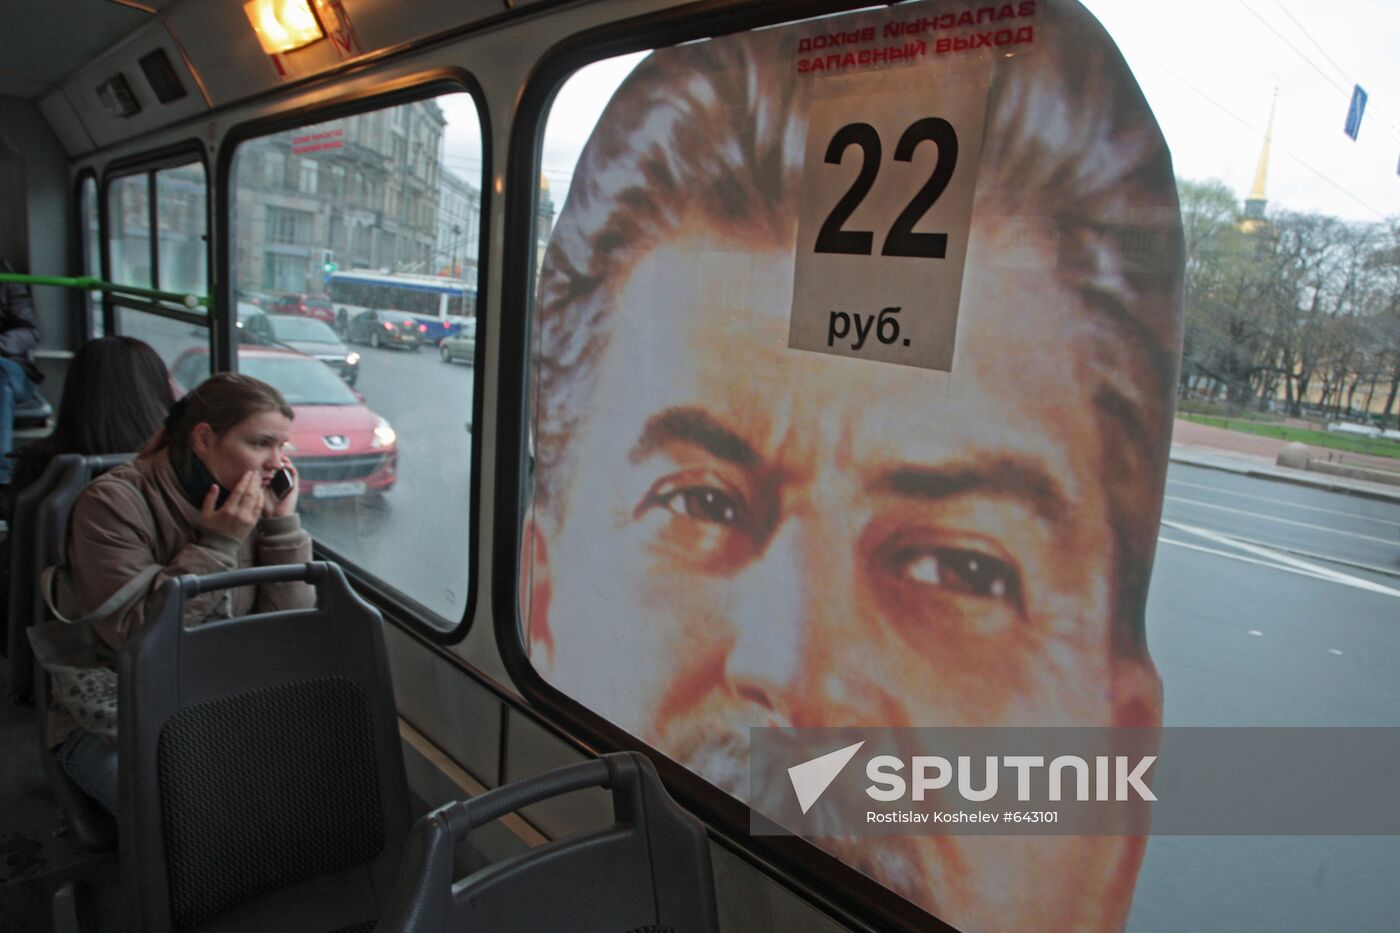 Bus with portrait of Iosif Stalin in St. Petersburg